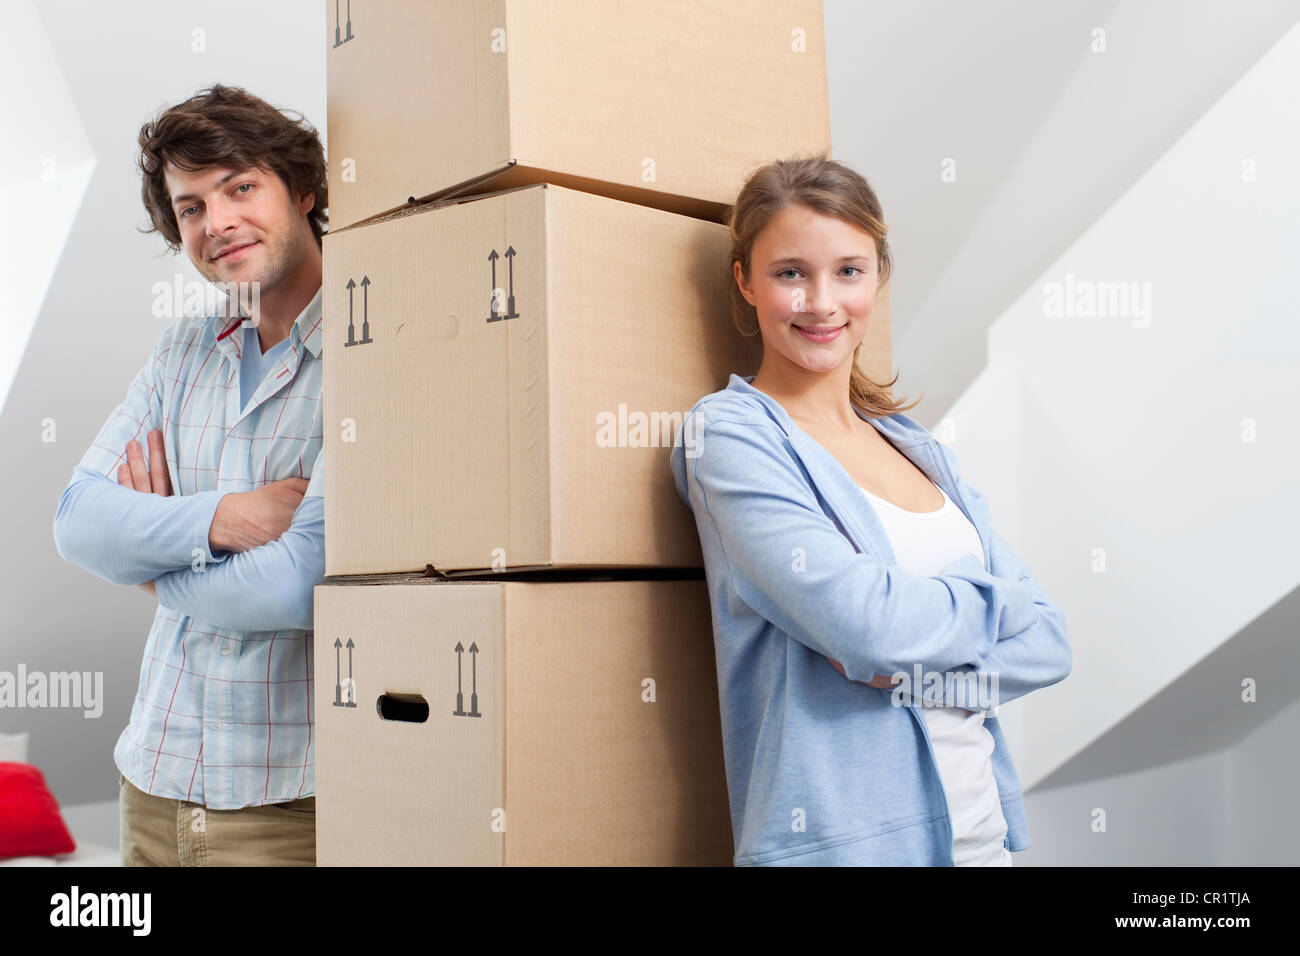 Couple with stack of cardboard boxes Stock Photo